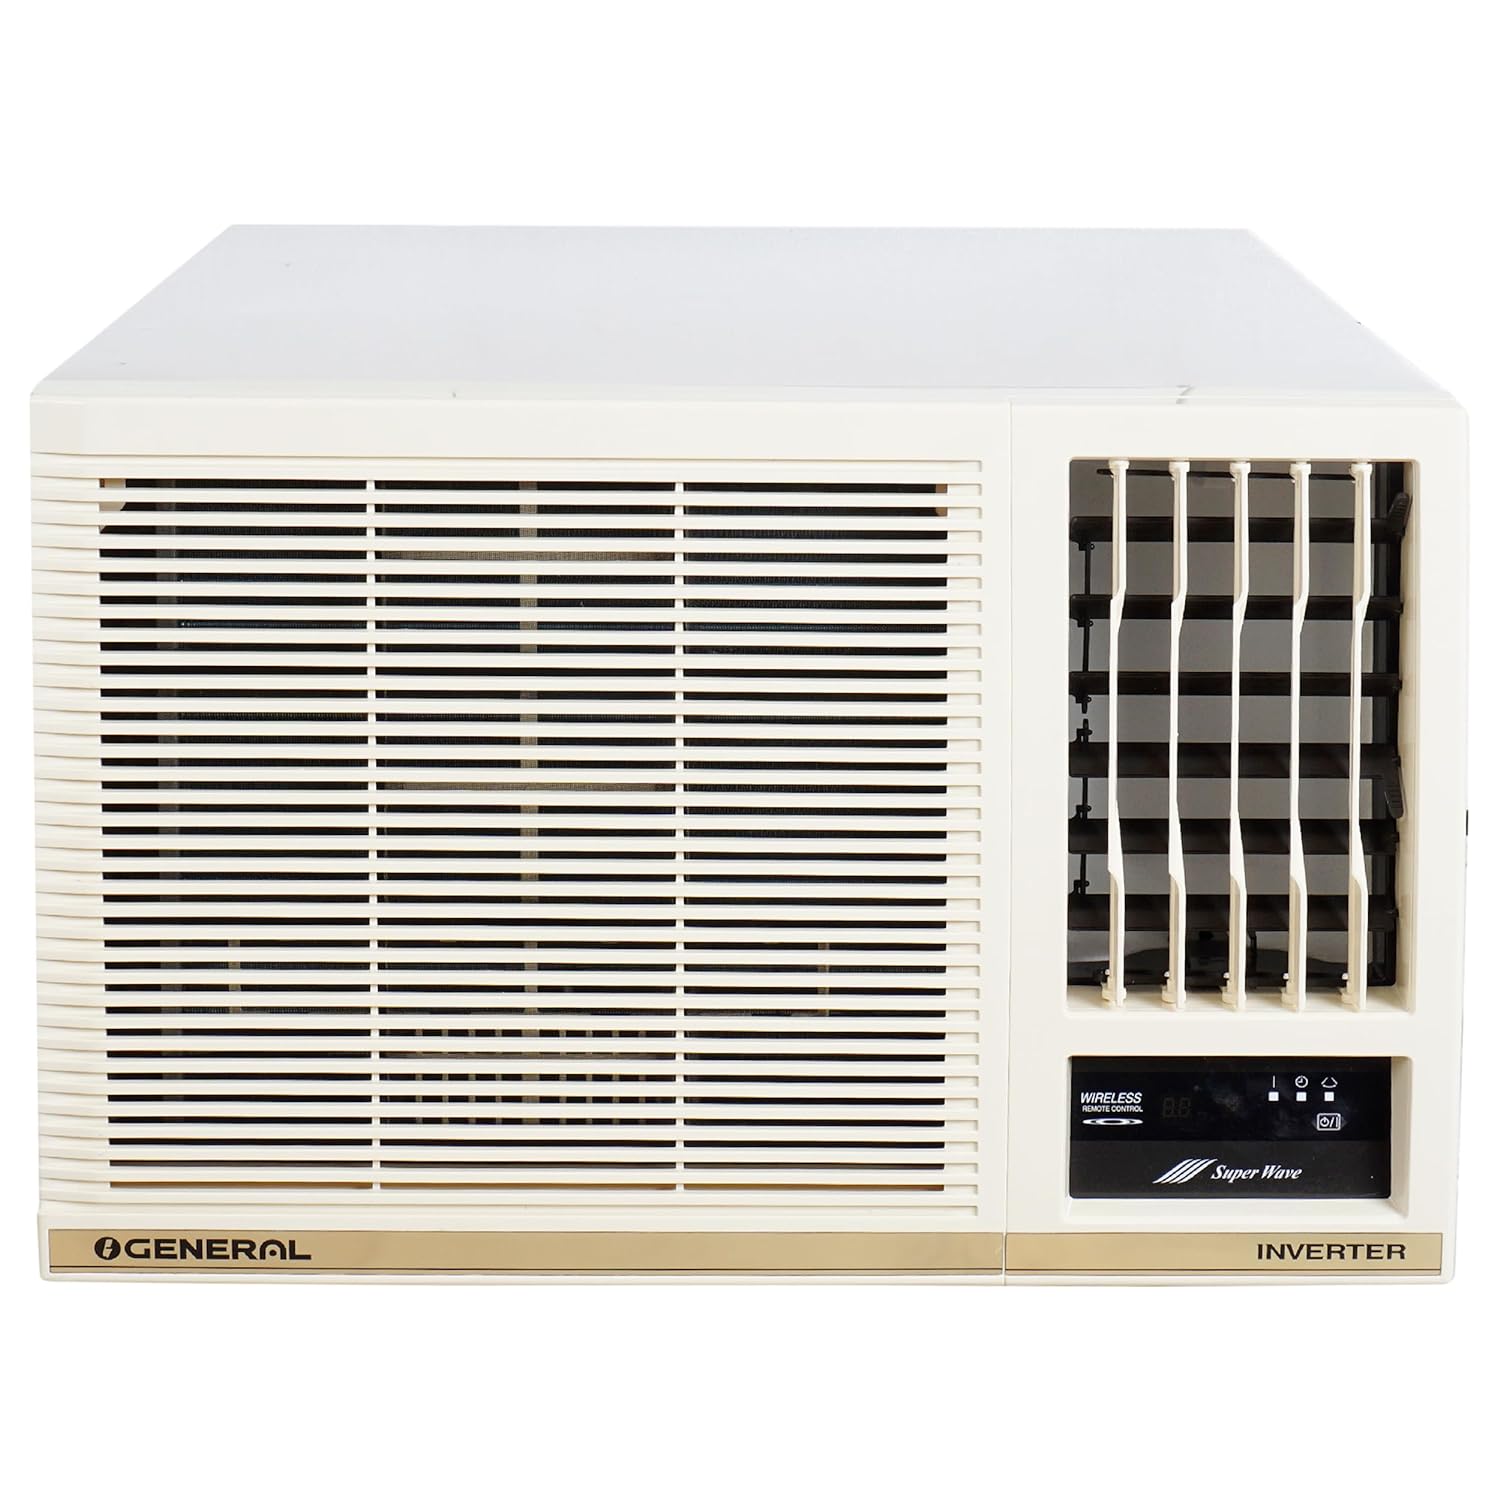 O-General BBAA Series 1.2 Ton 3 Star Window AC With Super Wave Technology 3-Speed Cooling AFGB14BBAA-B White